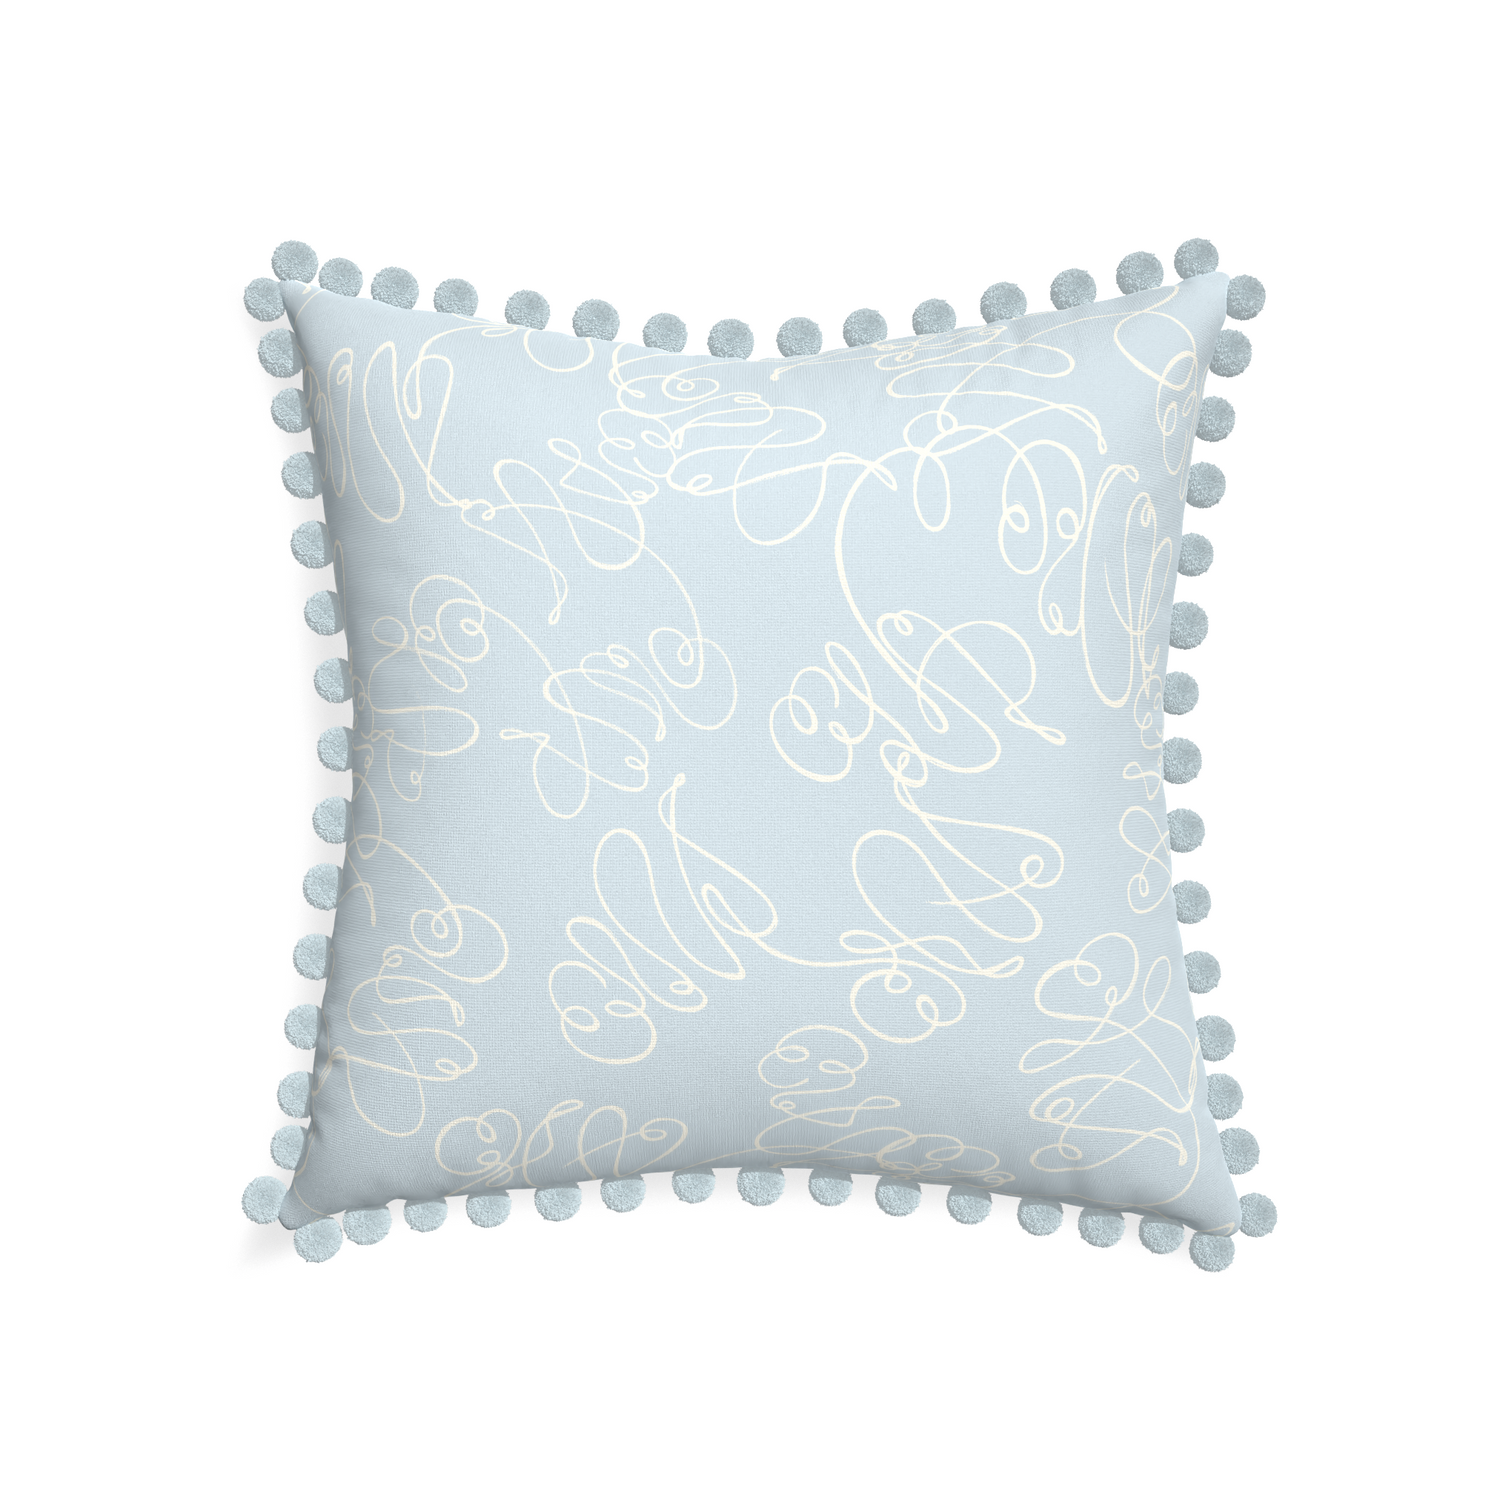 22-square mirabella custom powder blue abstractpillow with powder pom pom on white background